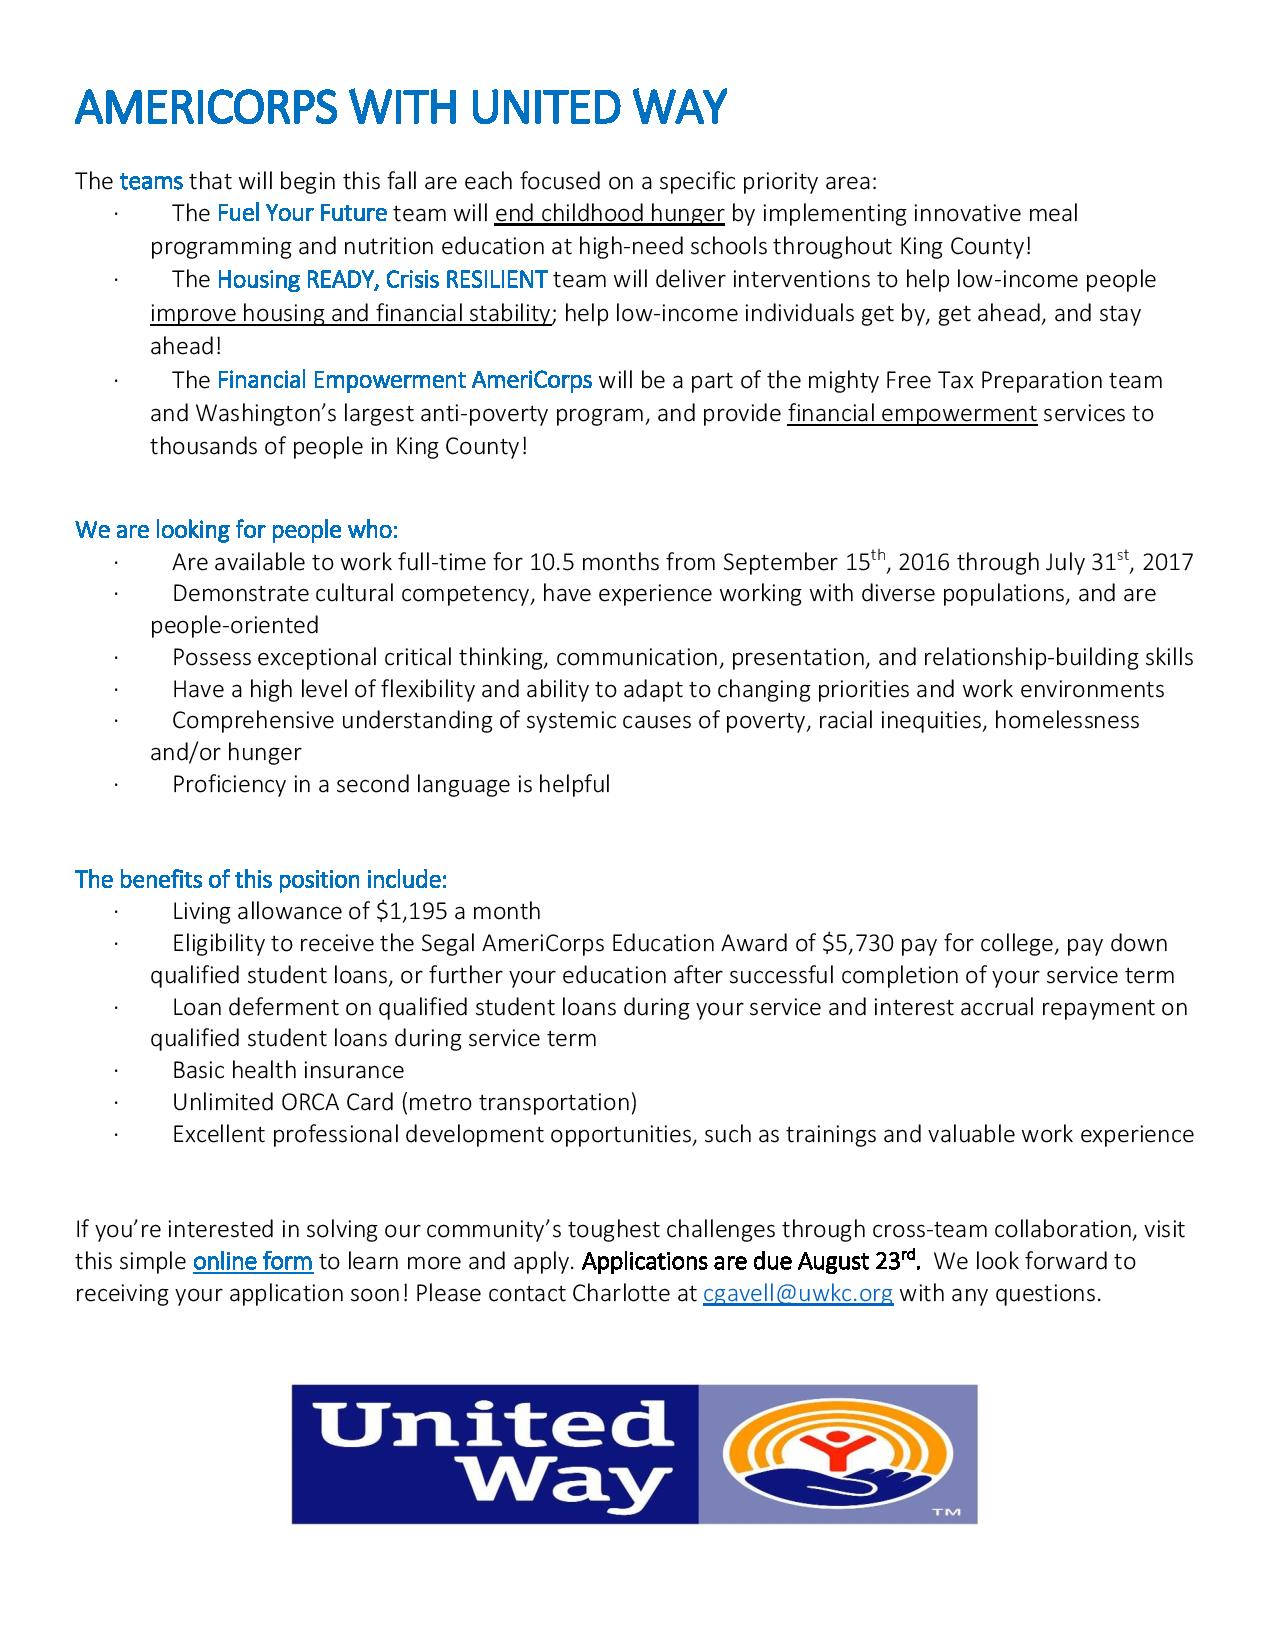 AmeriCorps With United Way Flyer